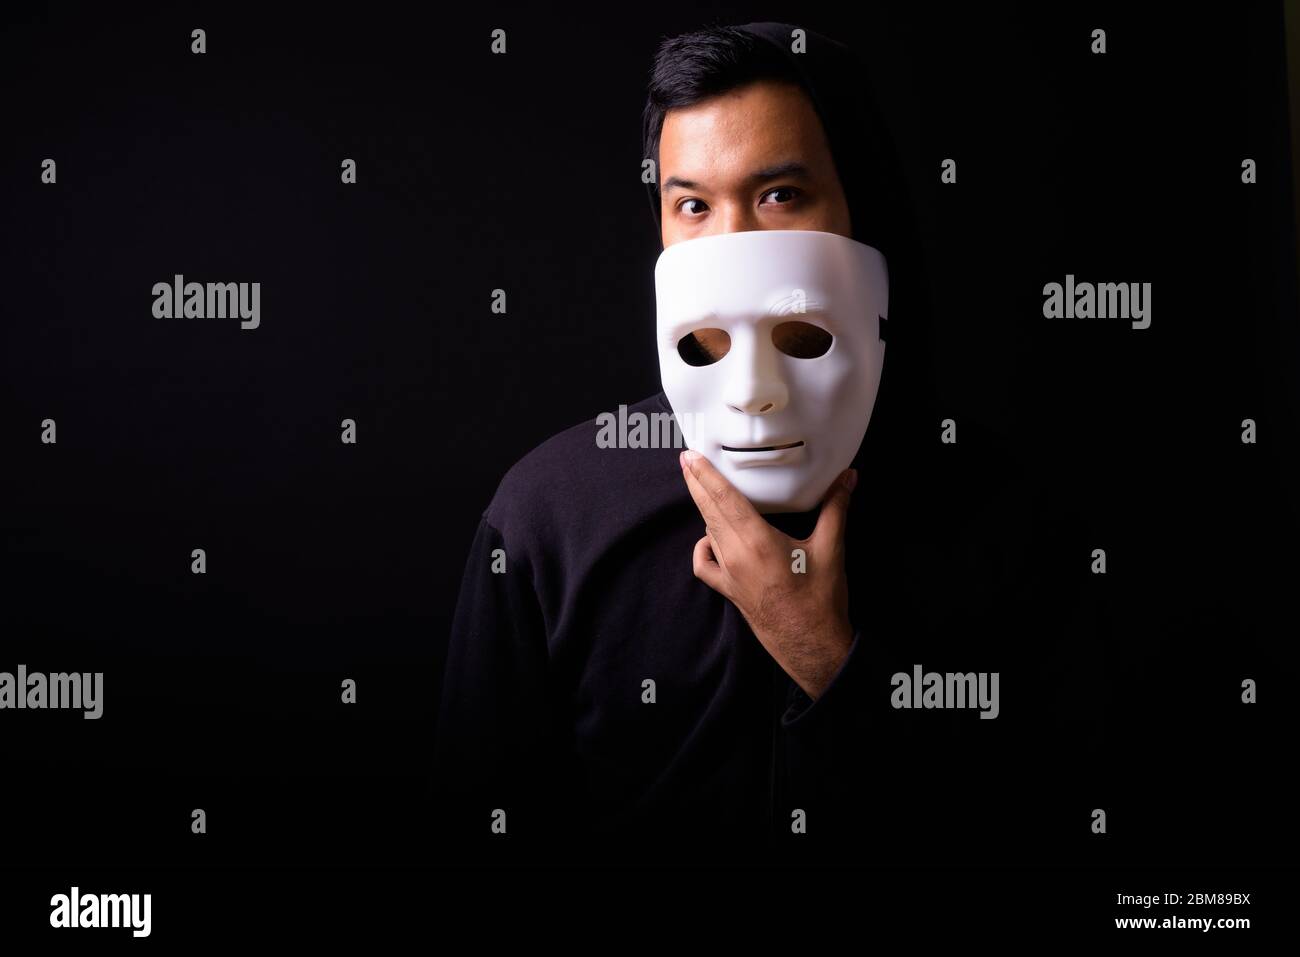 Portrait of young Asian man with hoodie wearing mask Stock Photo